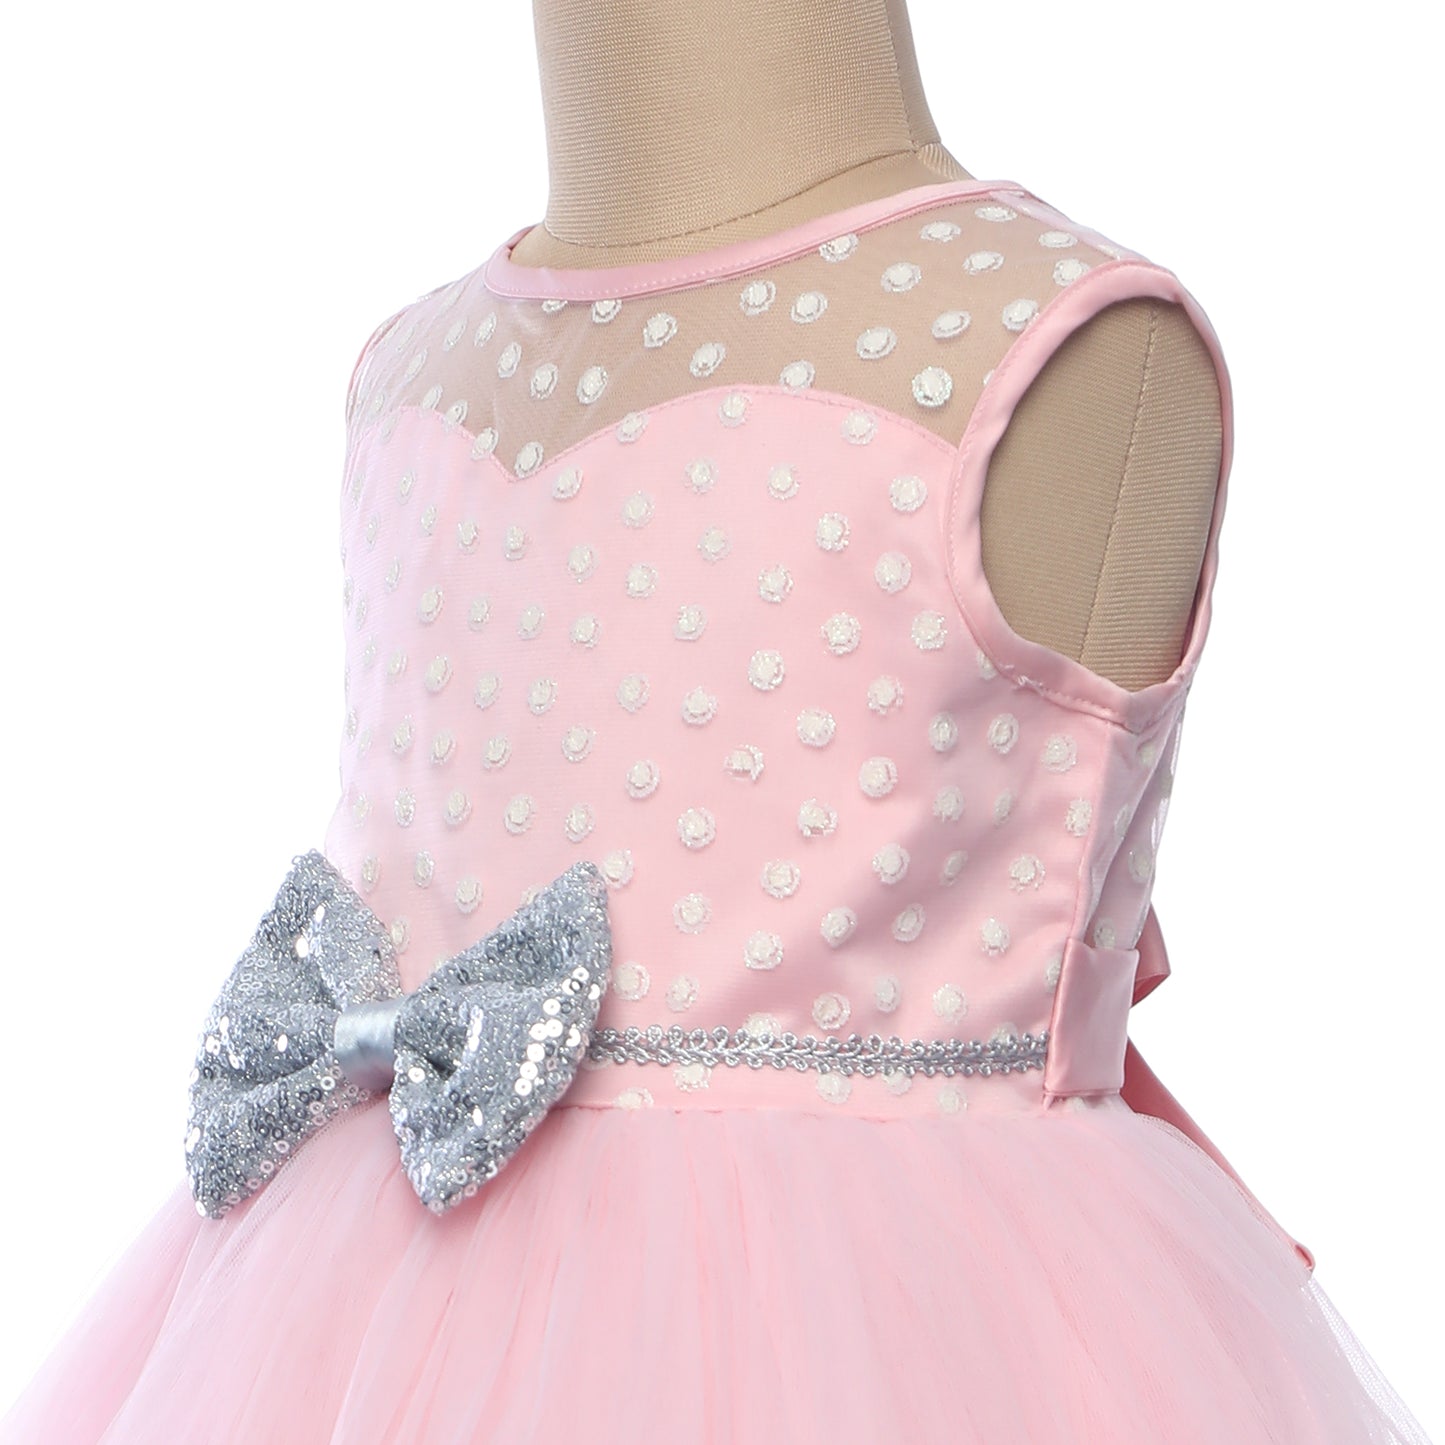 Pink Polka Dot with Bow Dress - Perfect for Mini Mouse Theme Birthday Parties, Weddings Flower Girls